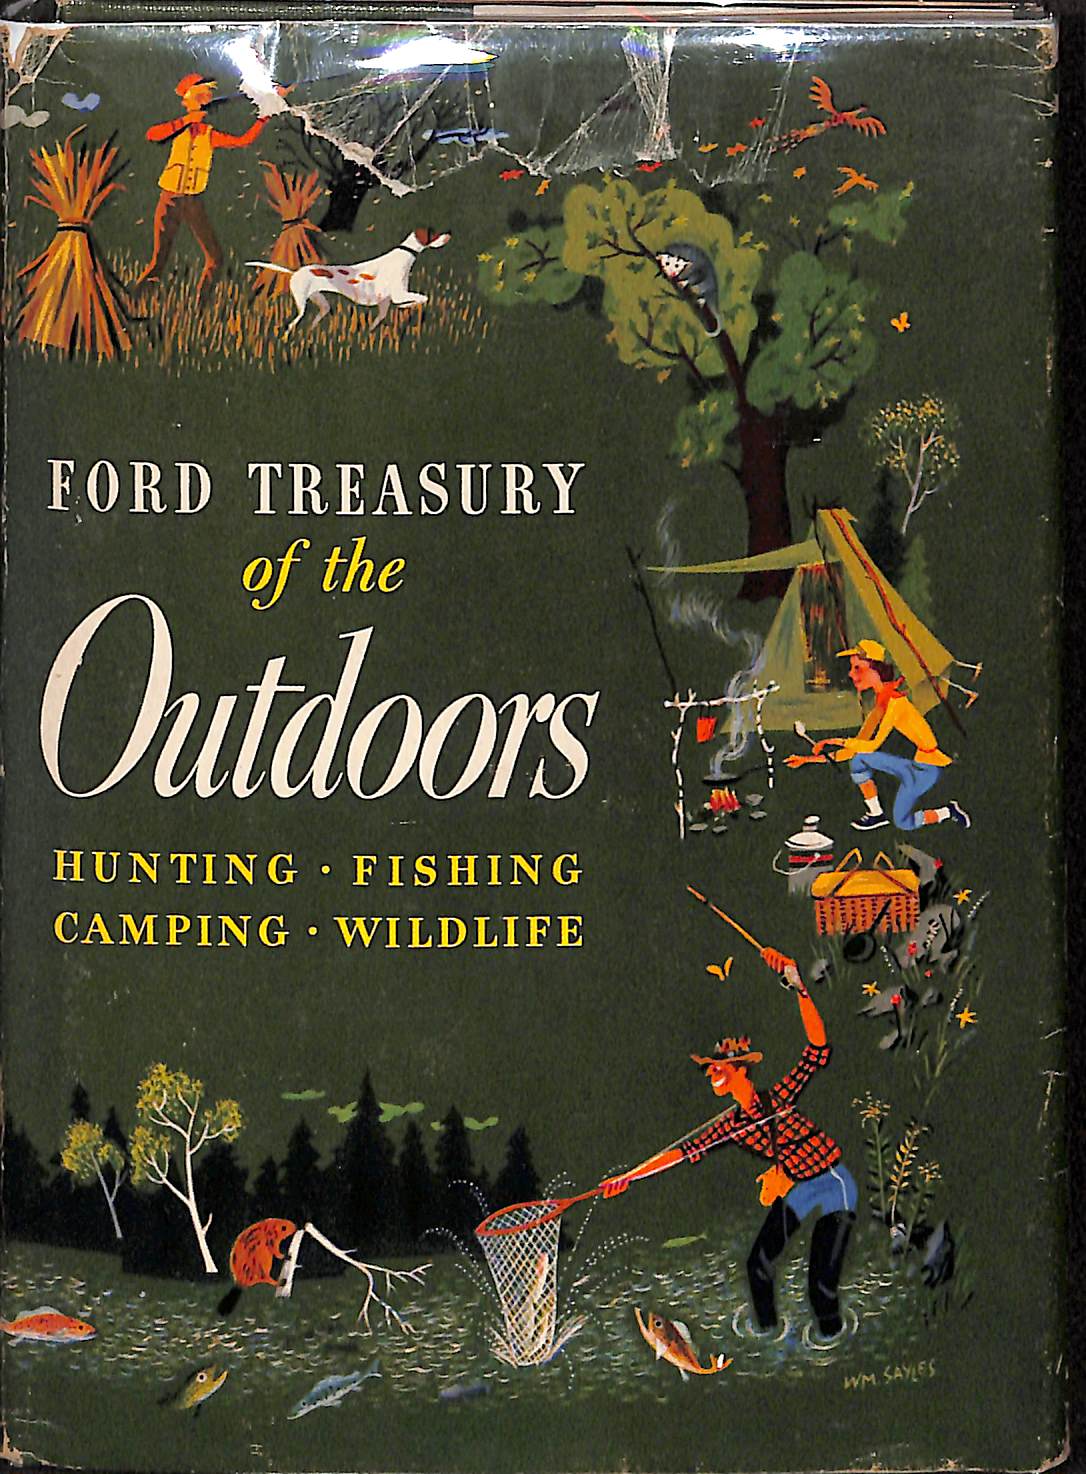 fishing hunting camping - Fishing Hunting Camping - Posters and